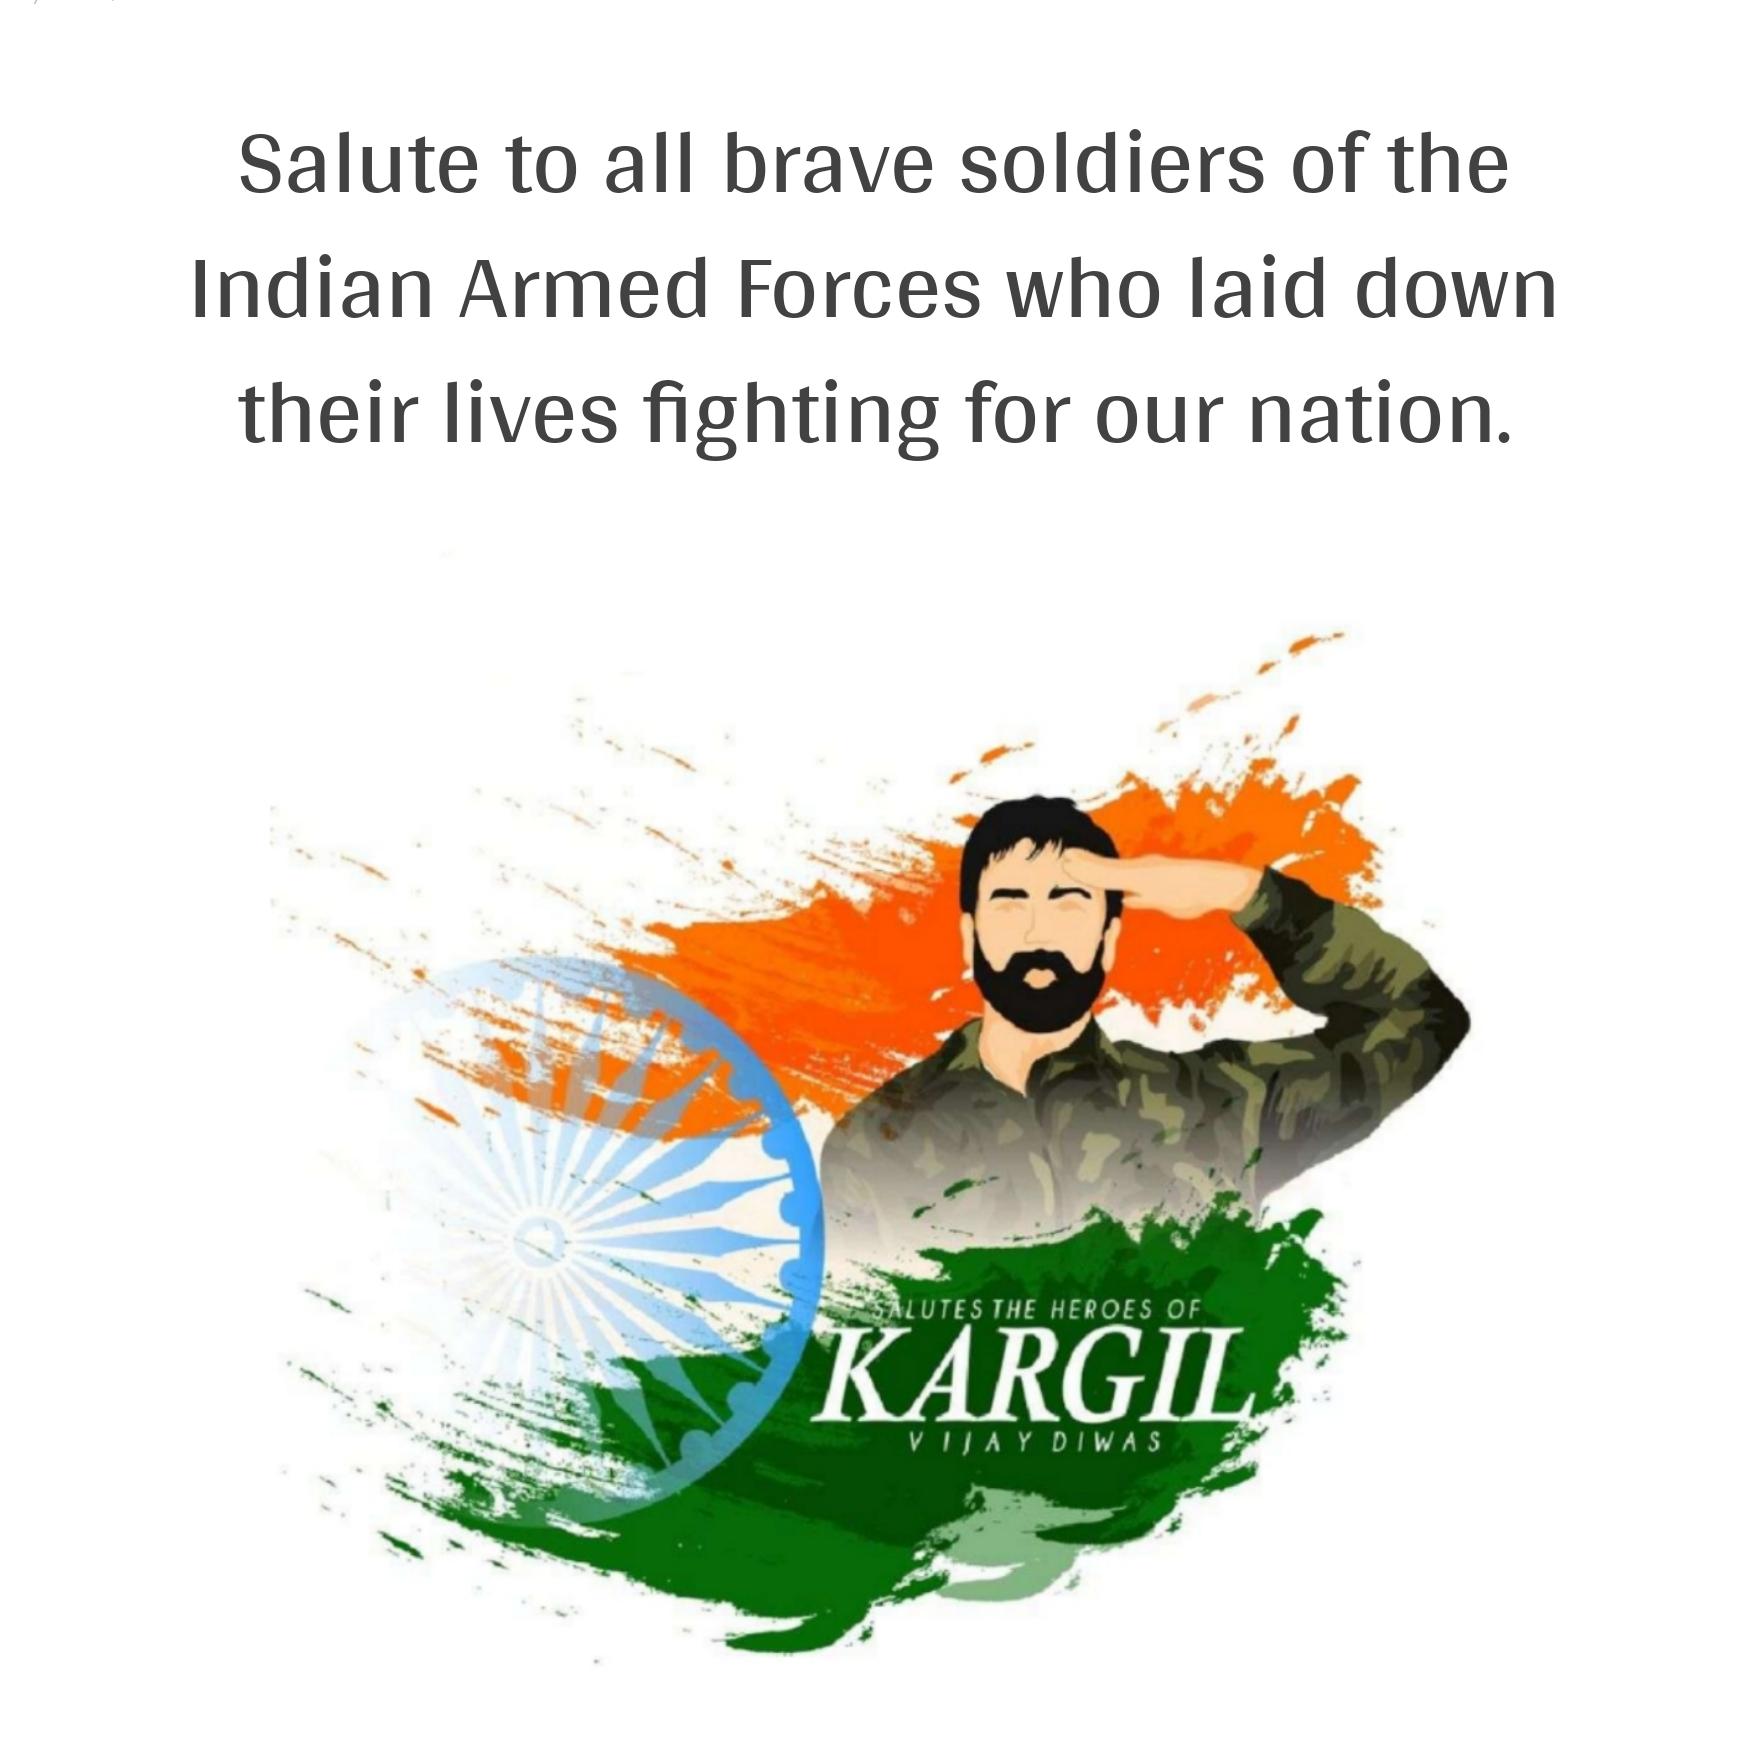 Salute to all brave soldiers of the Indian Armed Forces who laid down their lives